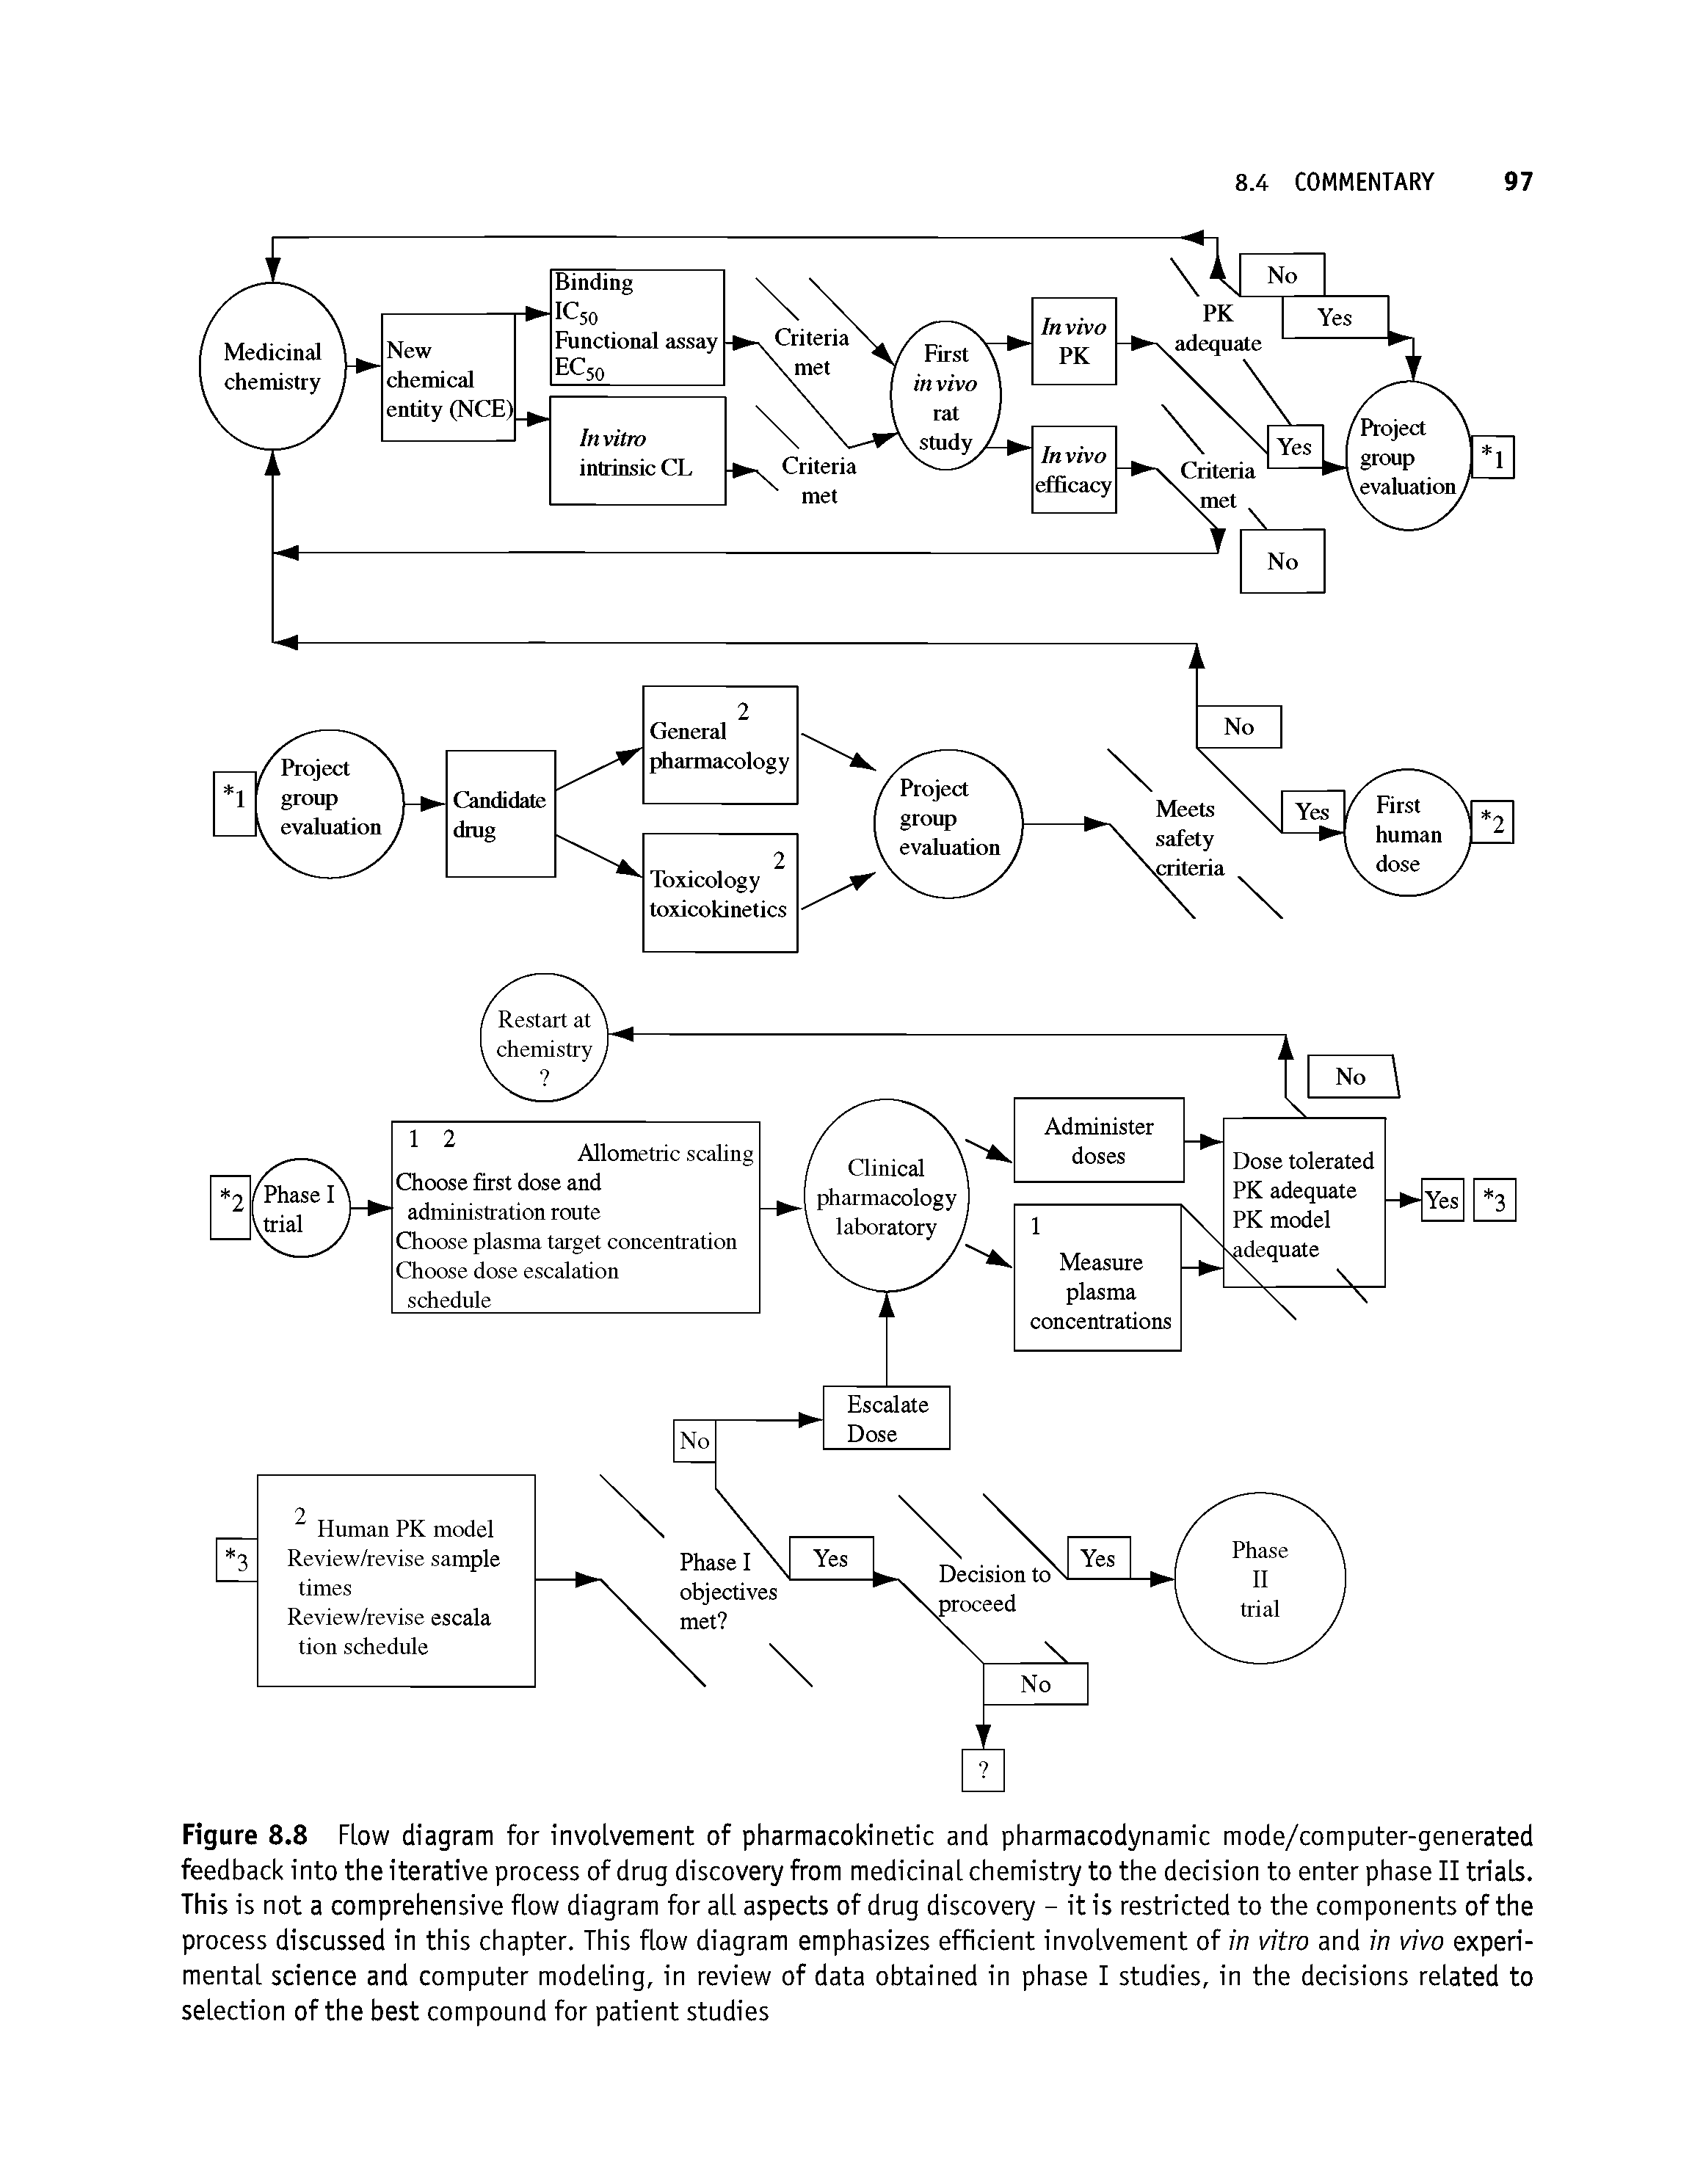 Figure 8.8 Flow diagram for involvement of pharmacokinetic and pharmacodynamic mode/computer-generated feedback into the iterative process of drug discovery from medicinal chemistry to the decision to enter phase II trials. This is not a comprehensive flow diagram for all aspects of drug discovery - it is restricted to the components of the process discussed in this chapter. This flow diagram emphasizes efficient involvement of in vitro and in vivo experimental science and computer modeling, in review of data obtained in phase I studies, in the decisions related to selection of the best compound for patient studies...